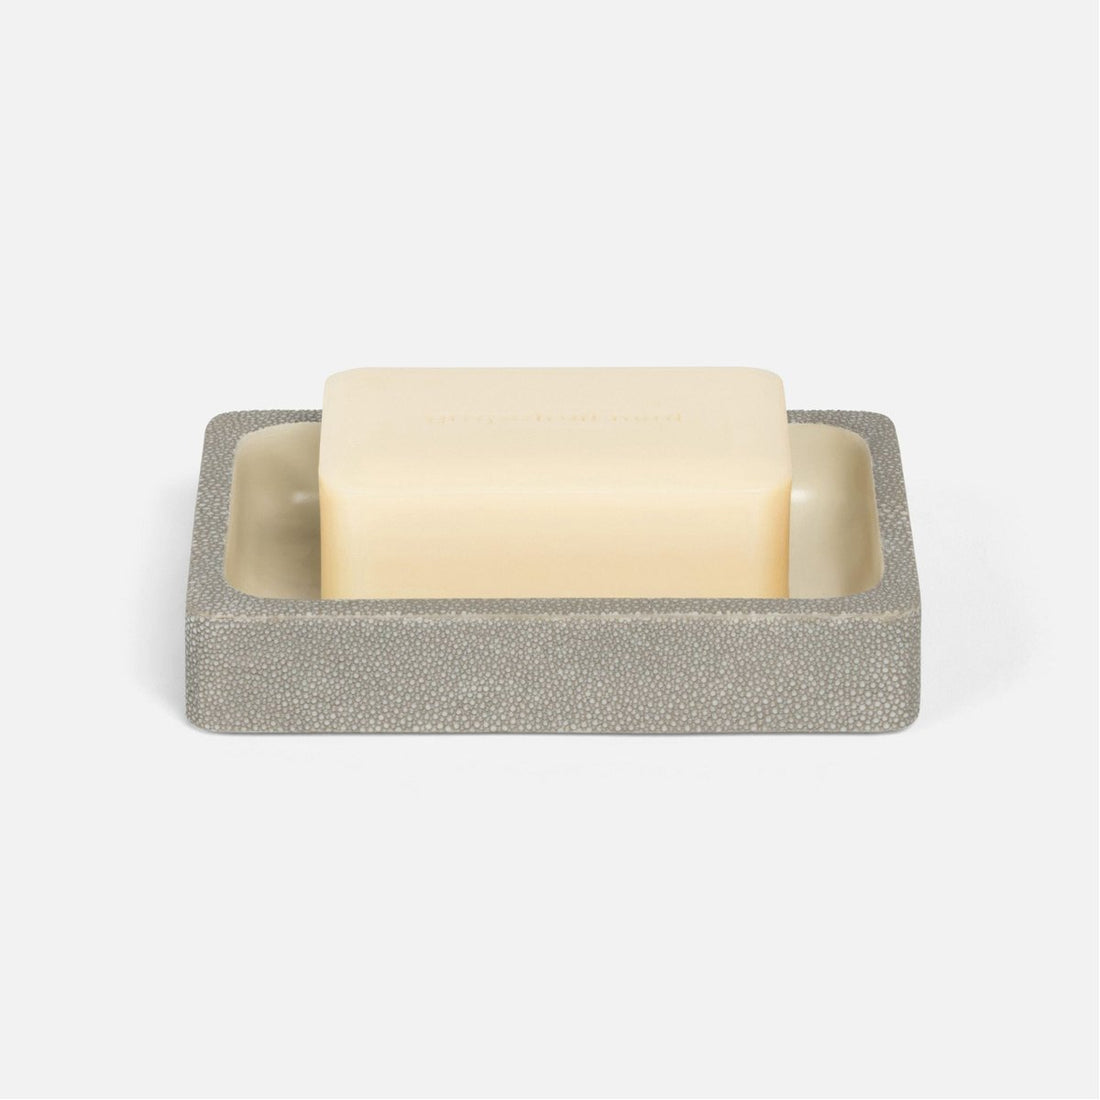 Pigeon and Poodle Tenby Rectangular Soap Dish, Straight